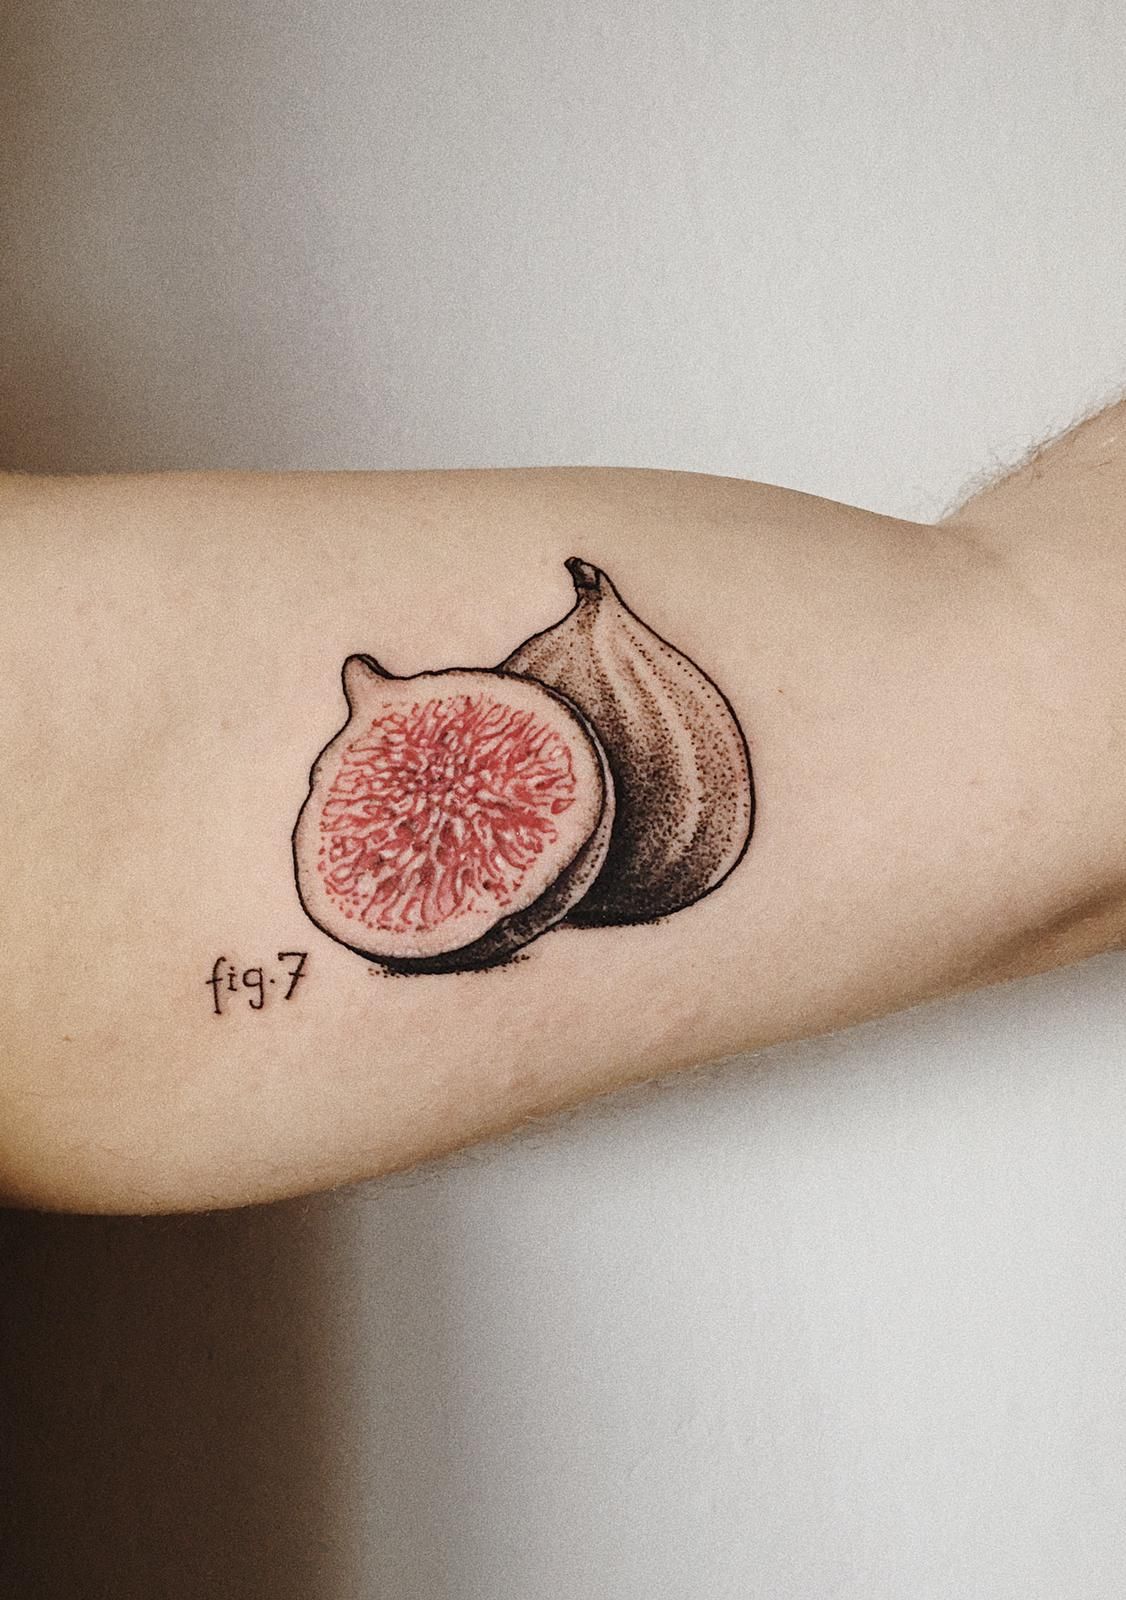 Vine and Fig Tree by Calli Loskill at Ink Sling Tattoo in Jefferson City  MO  rtattoos